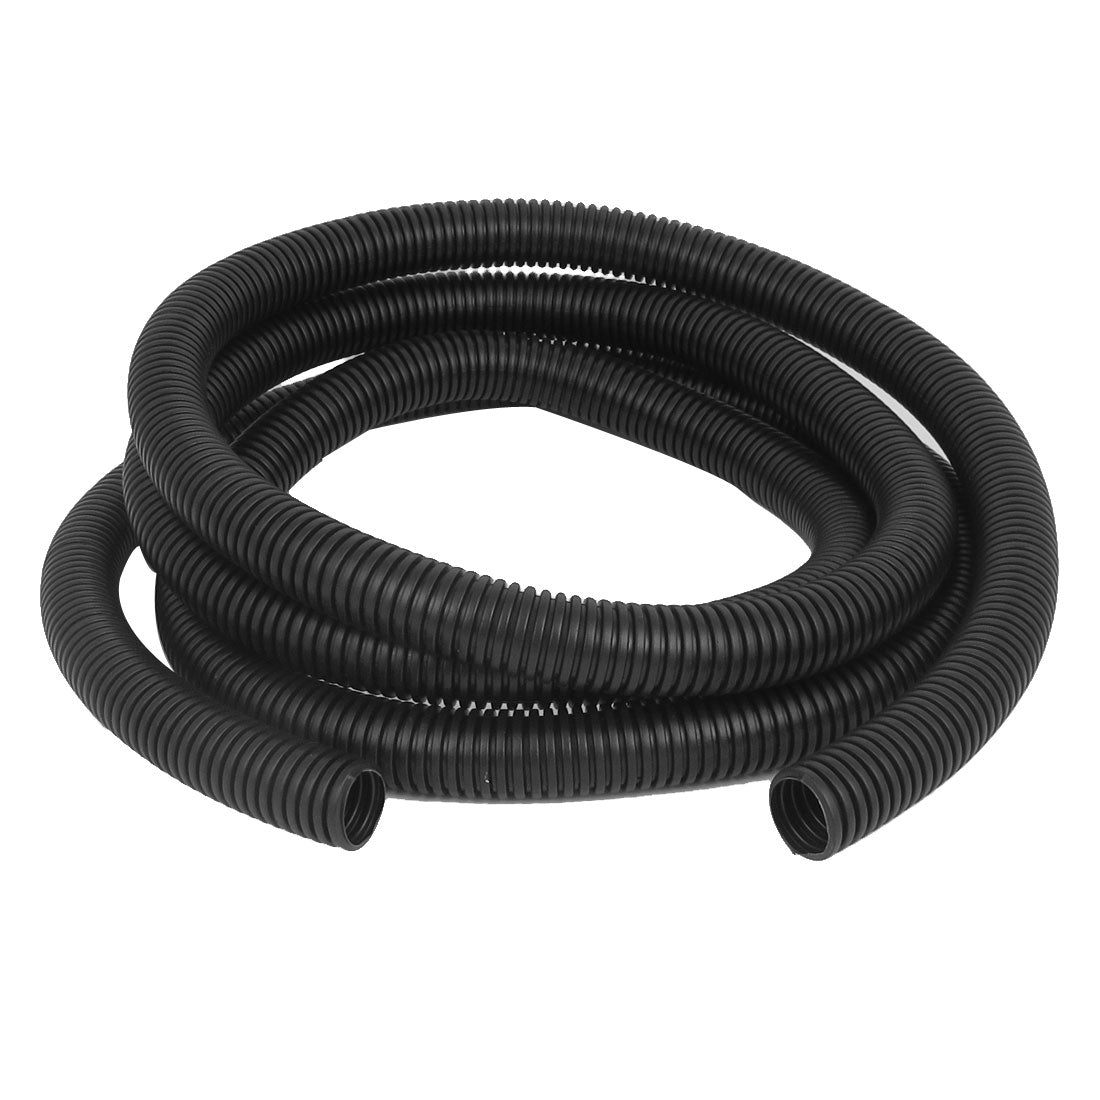 uxcell Uxcell 3 M 20 x 25 mm Plastic Flexible Corrugated Conduit Tube for Garden,Office Black